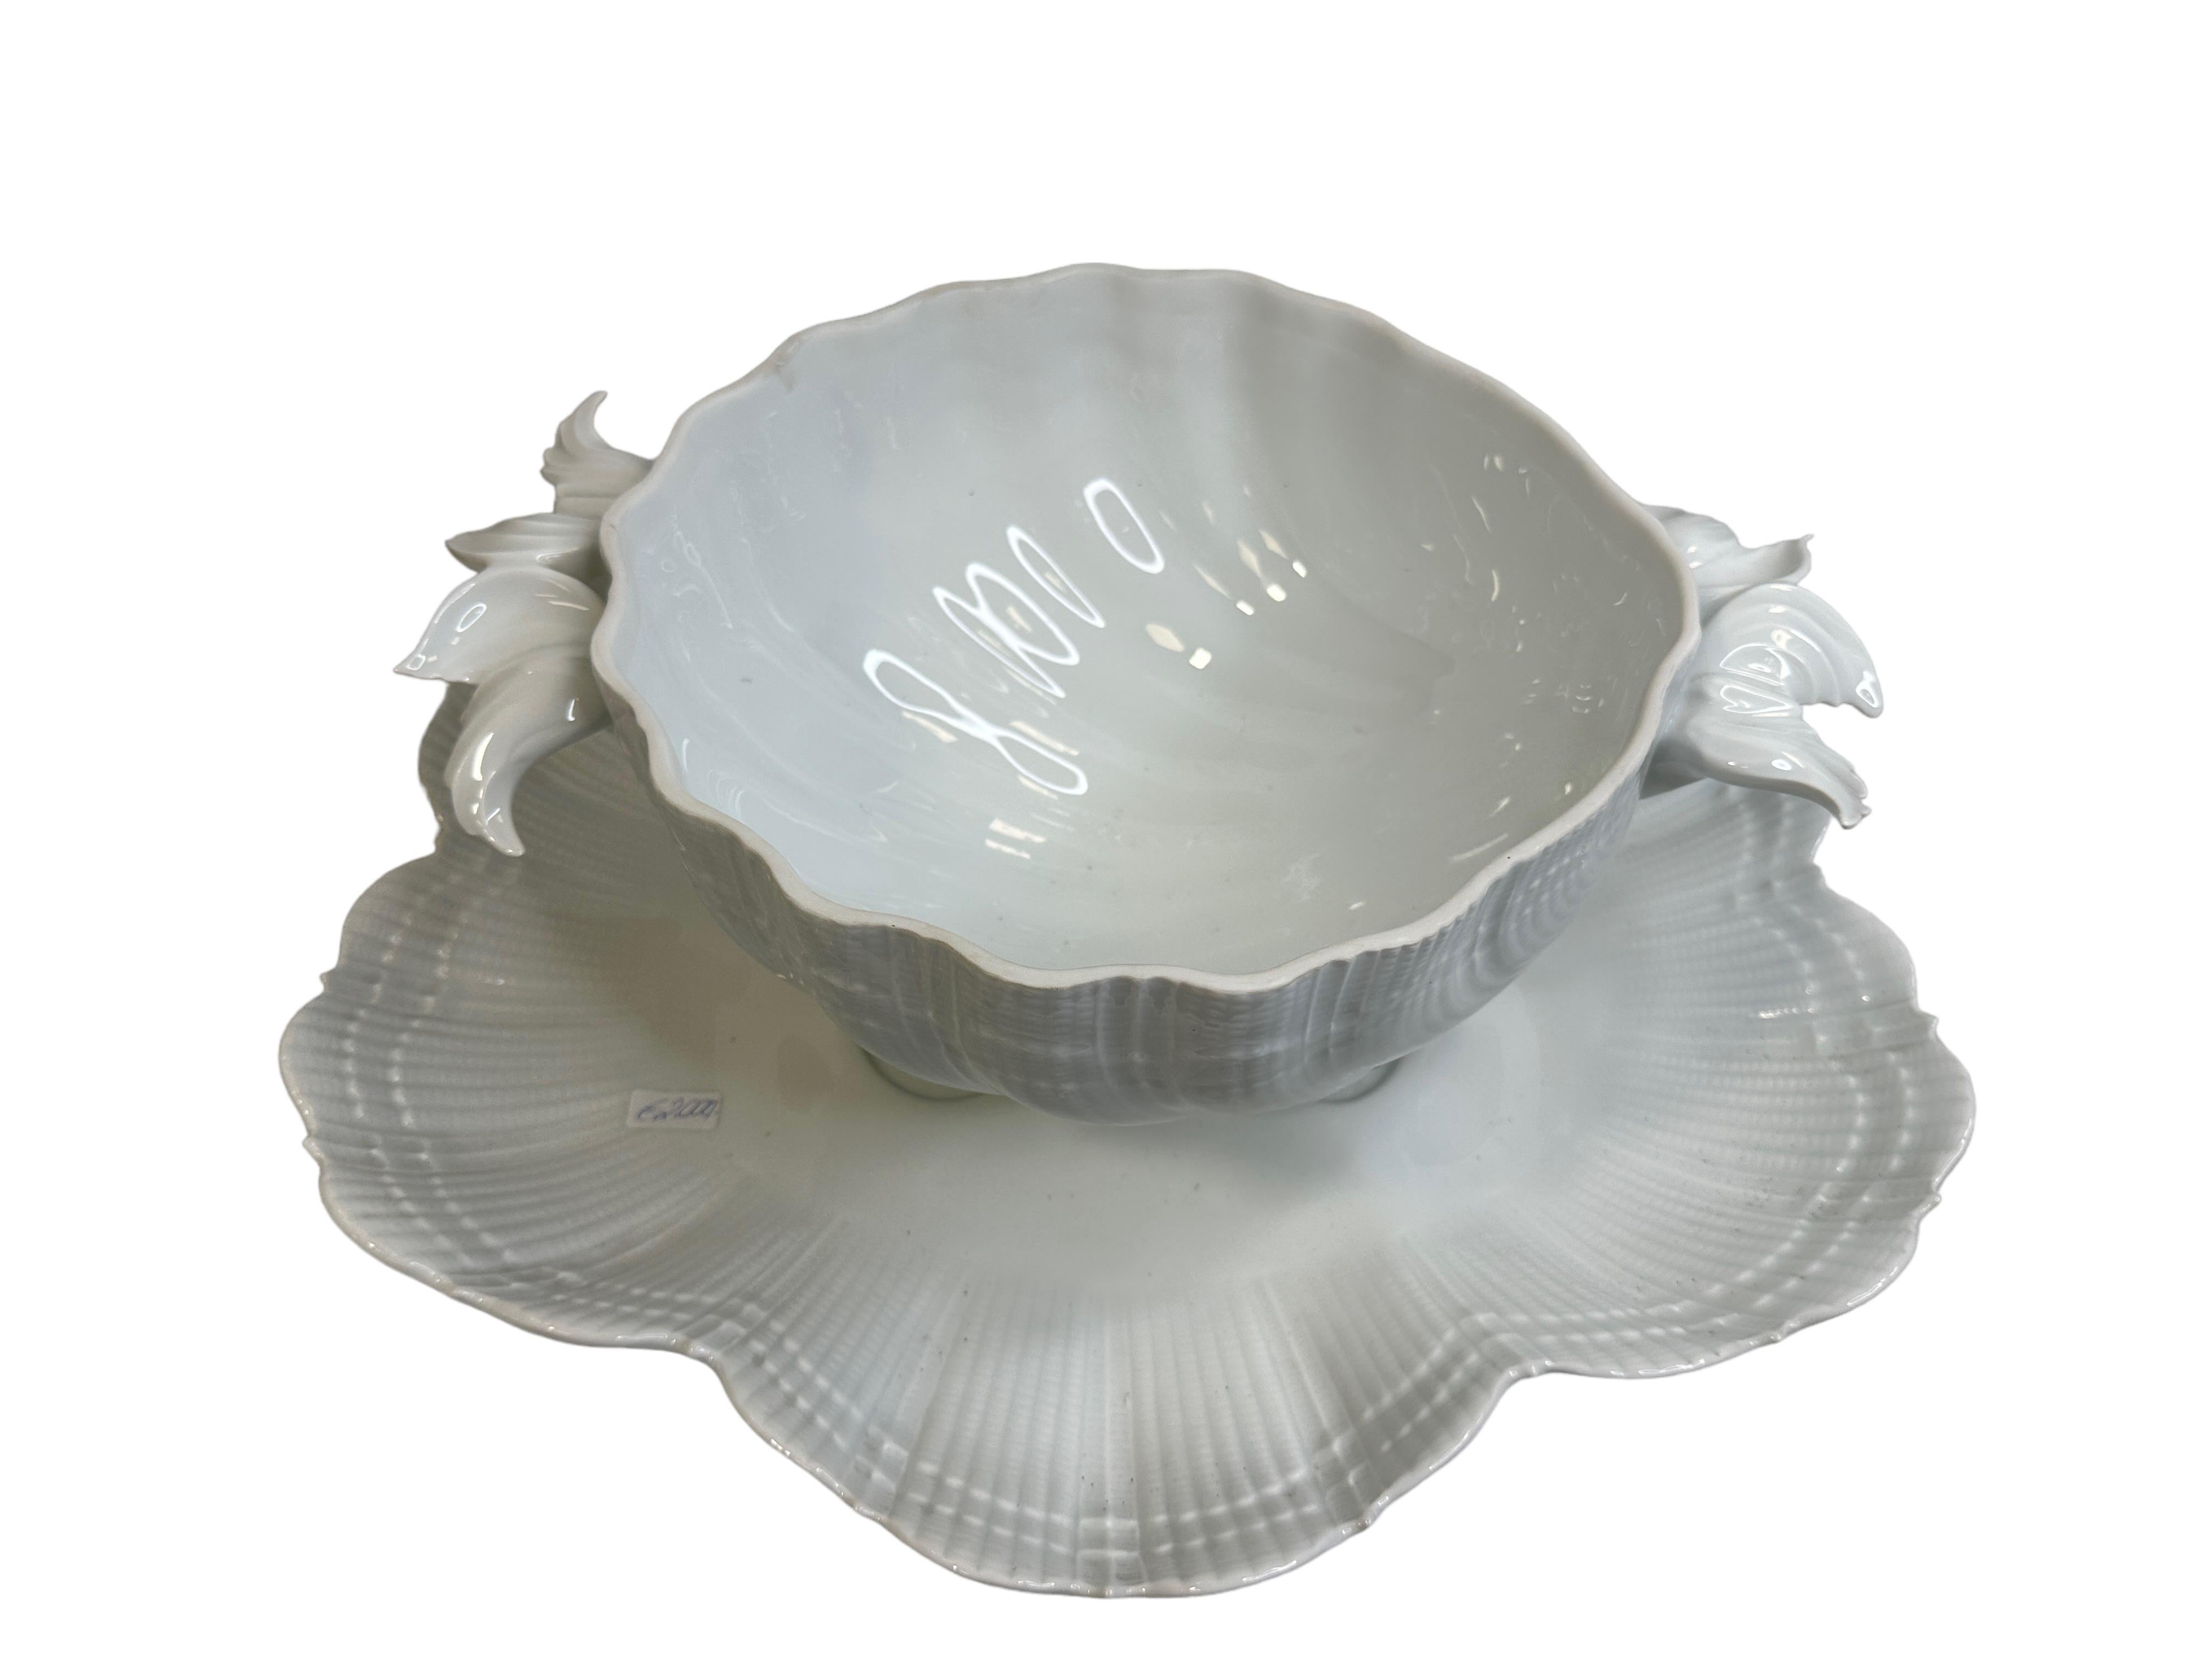 Exceptional Shell Shaped Limoges China Porcelain Soup Tureen with Dolphin Decor For Sale 3